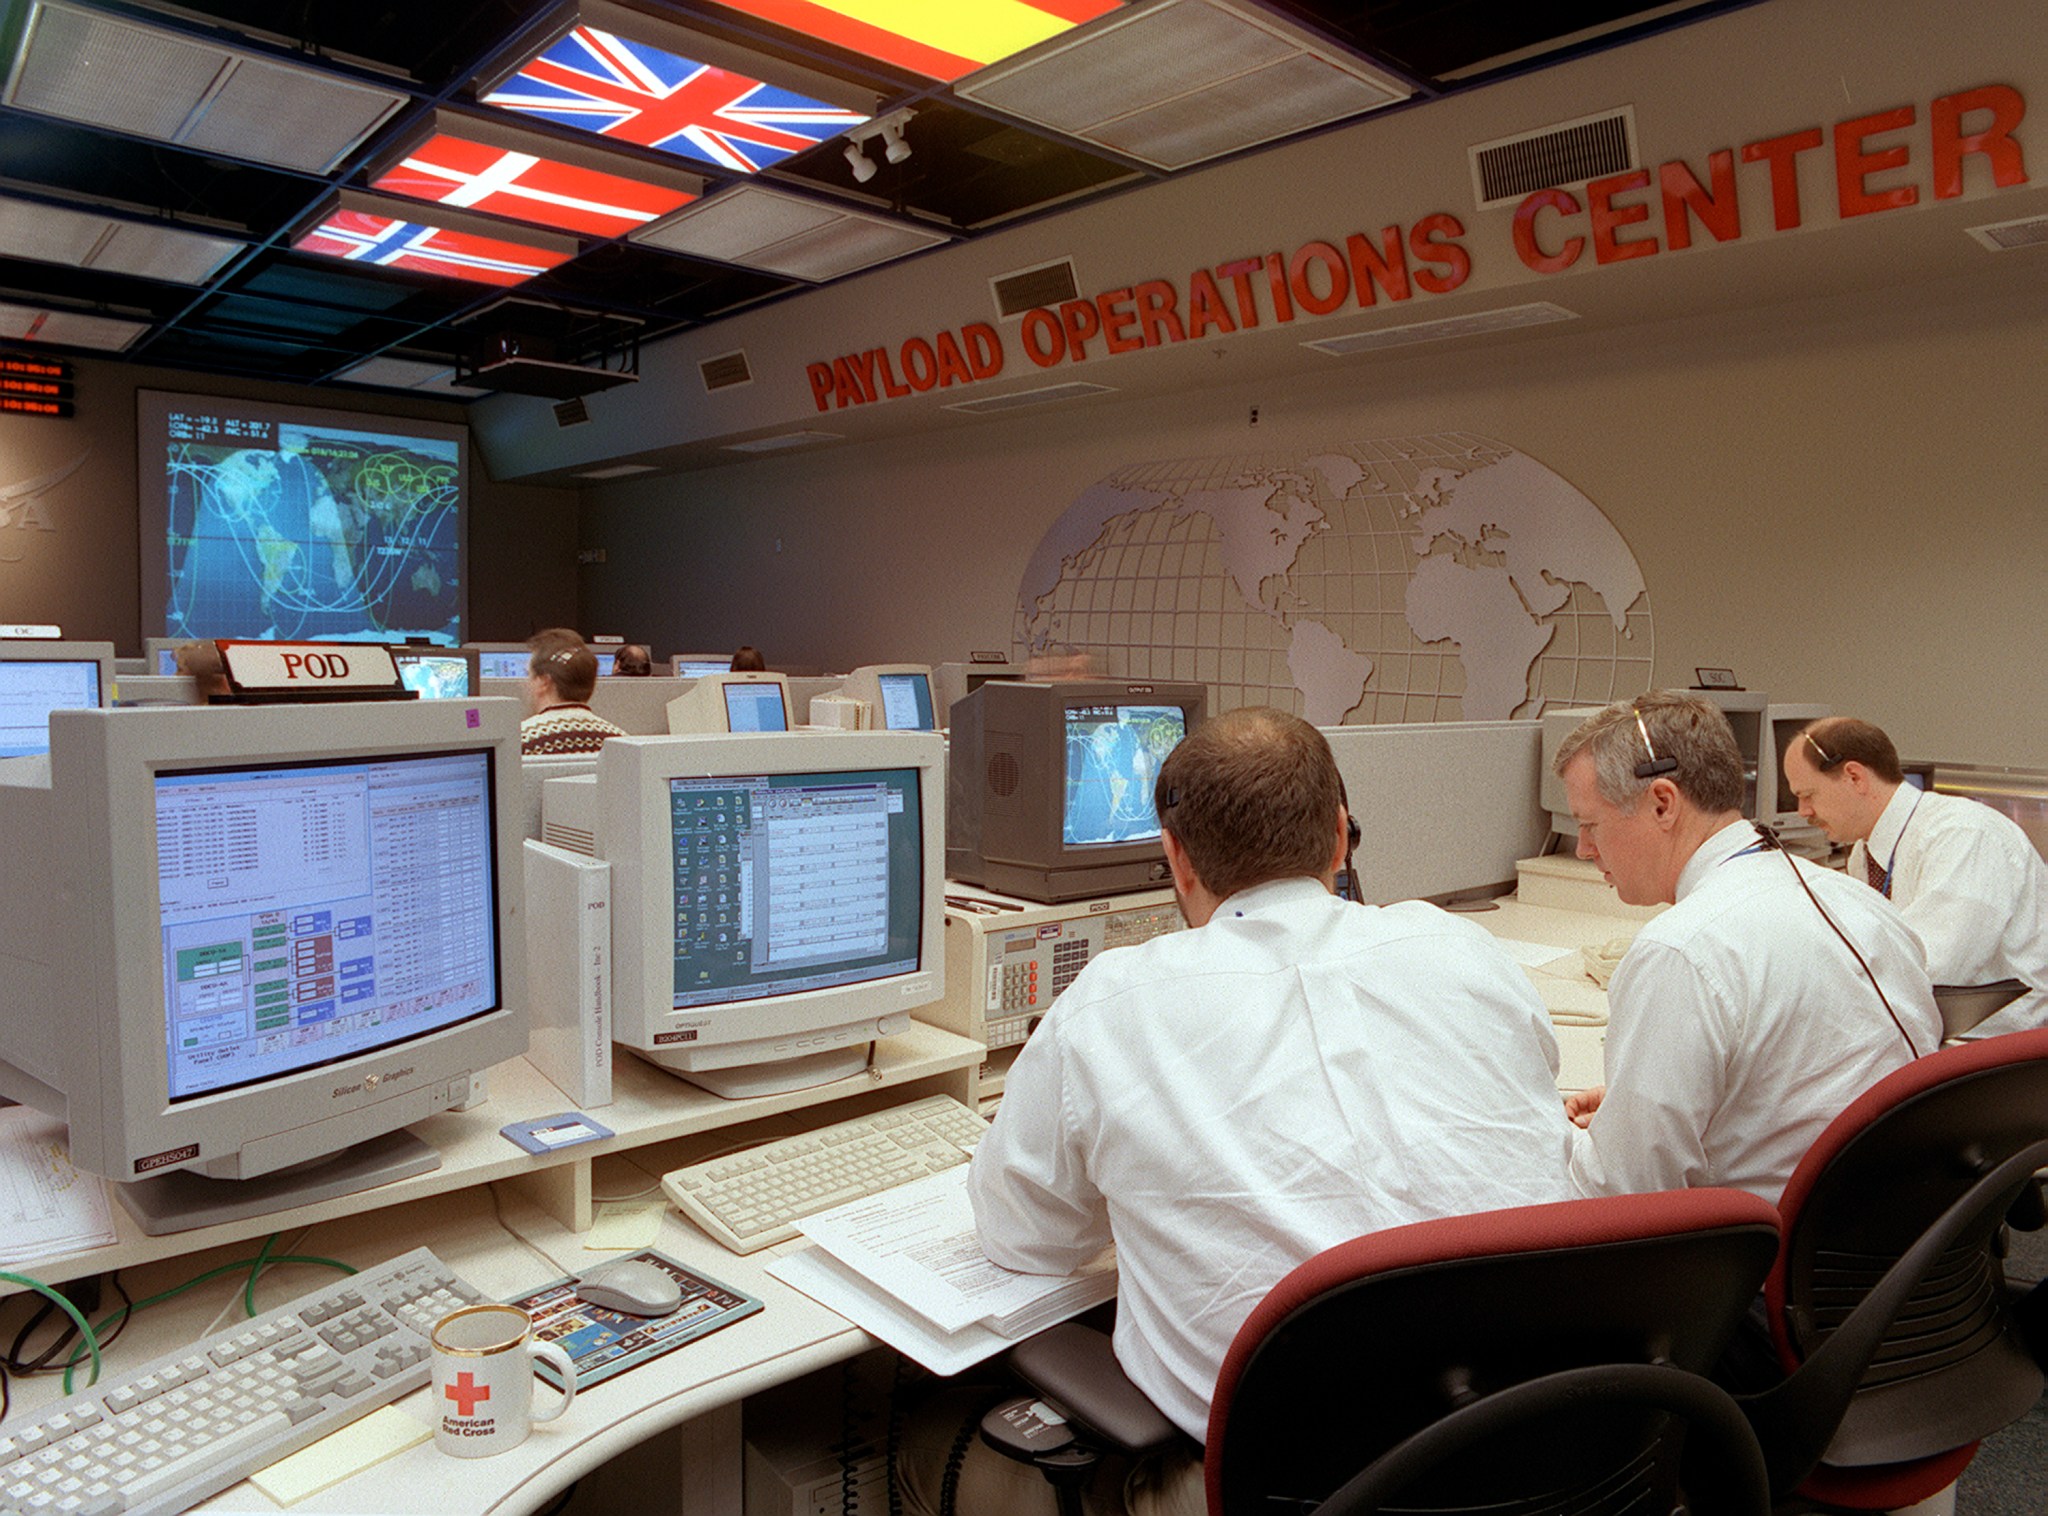 This photograph of the Payload Operations Integration Center was taken soon after certification was complete.